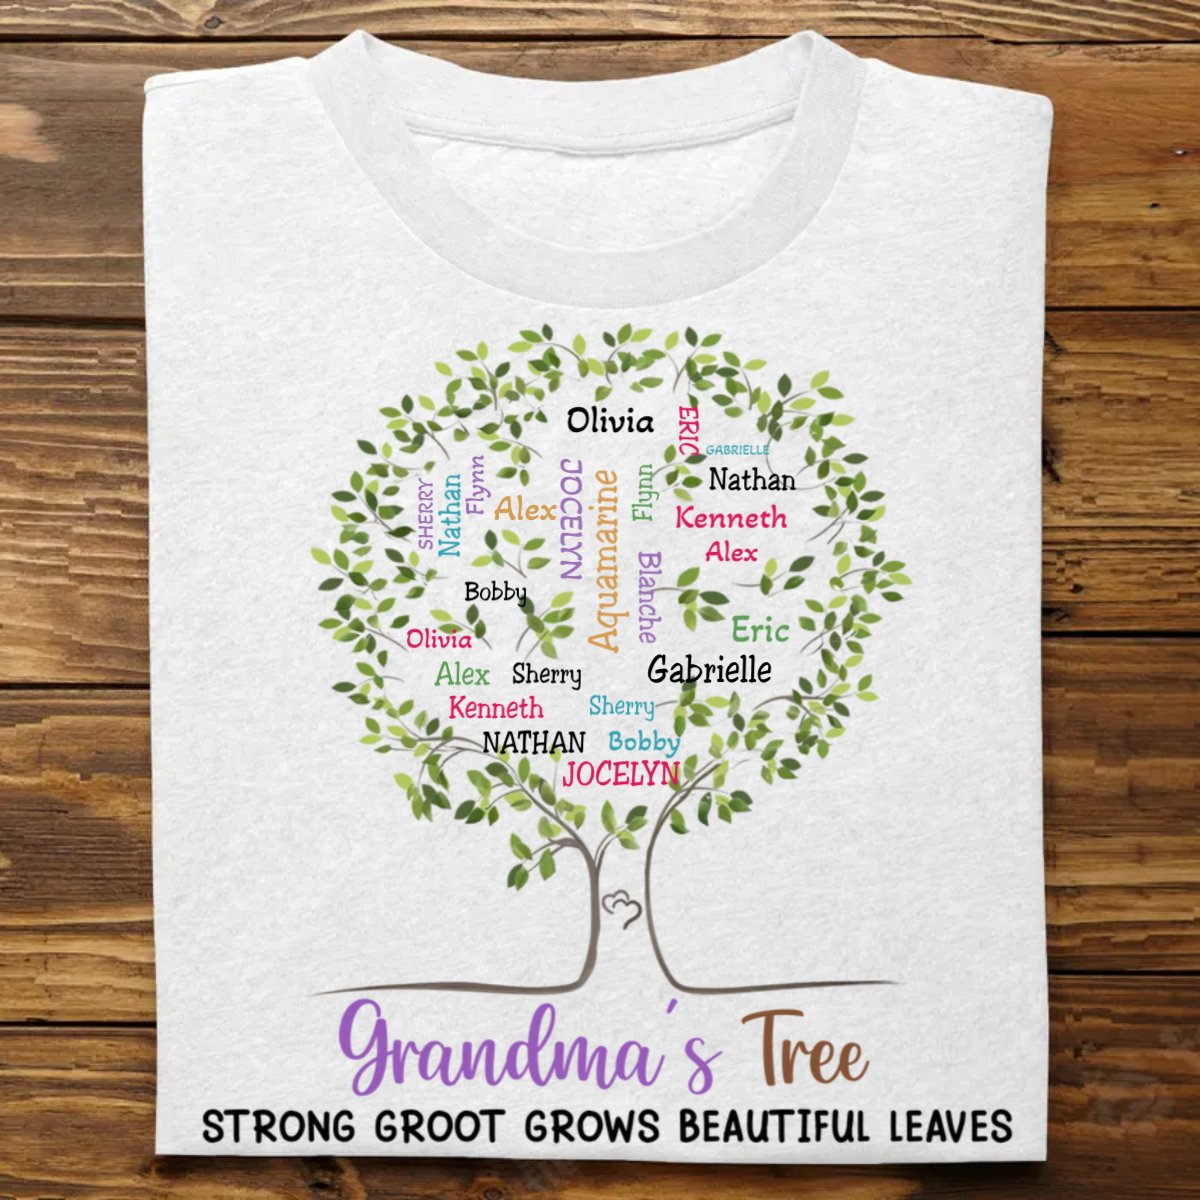 Discover Family - Grandma's Tree Strong Groot Grows Beautiful Leaves - Personalized Unisex T-shirt